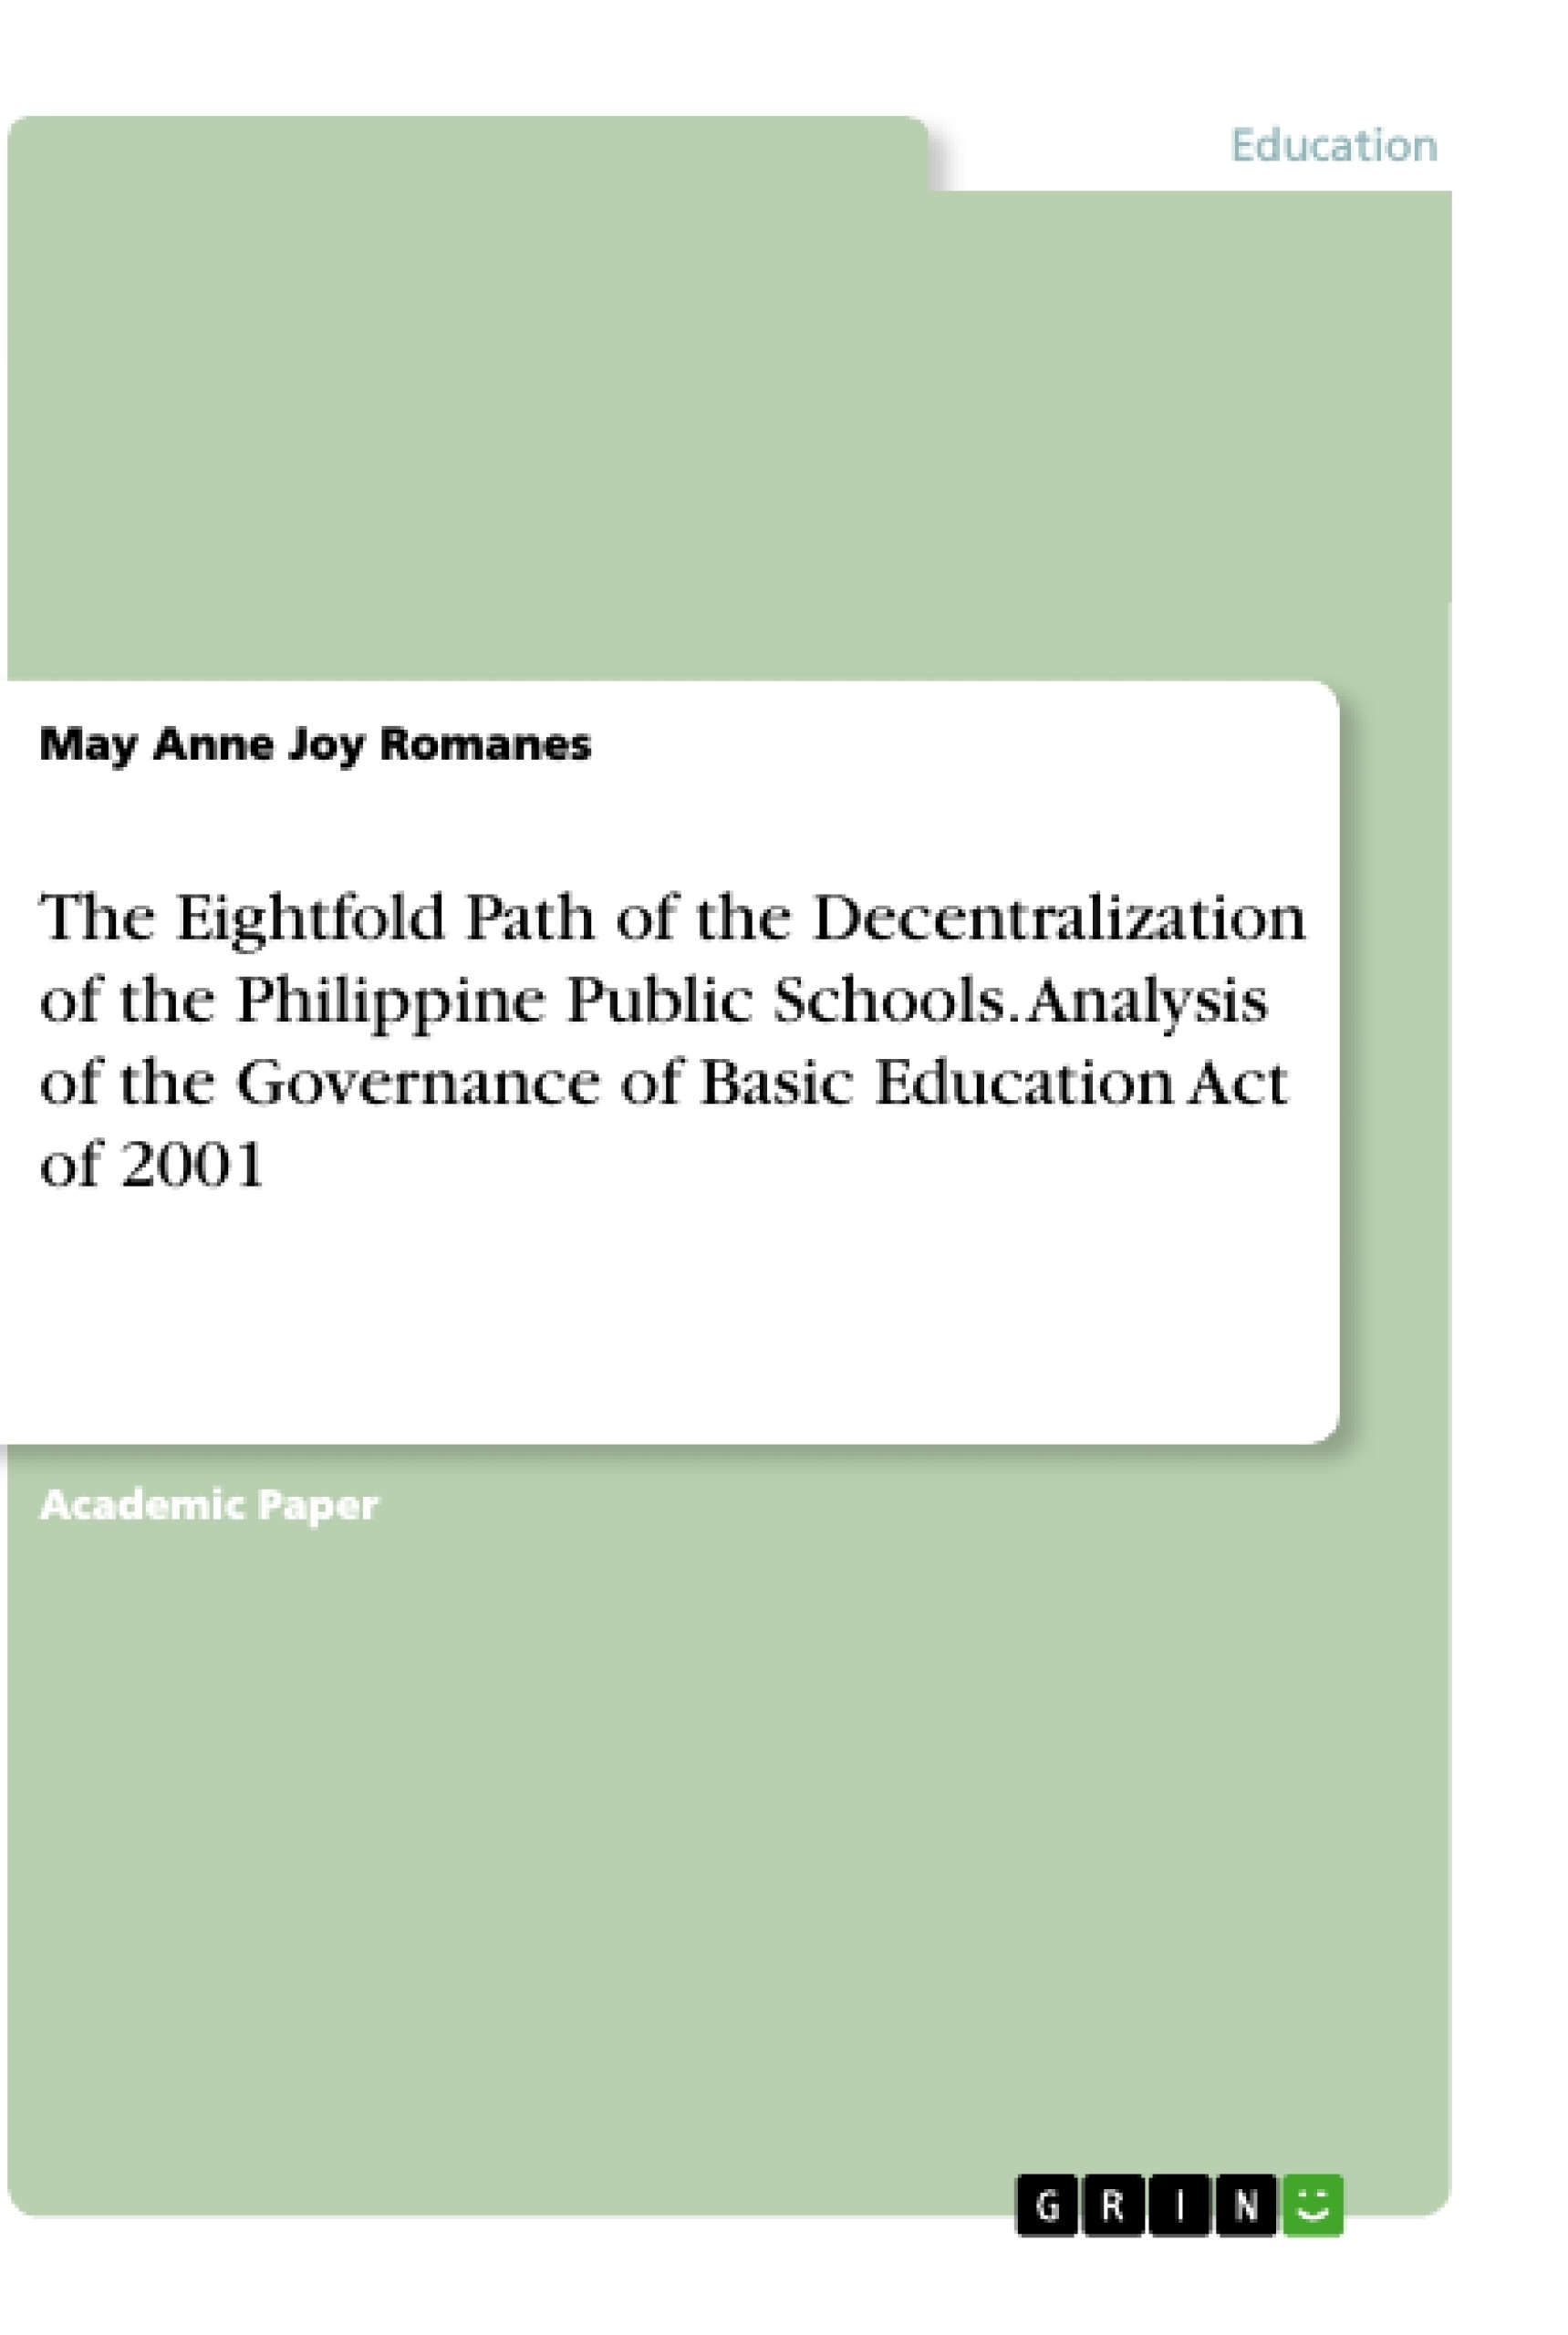 Title: The Eightfold Path of the Decentralization of the Philippine Public Schools. Analysis of the Governance of Basic Education Act of 2001